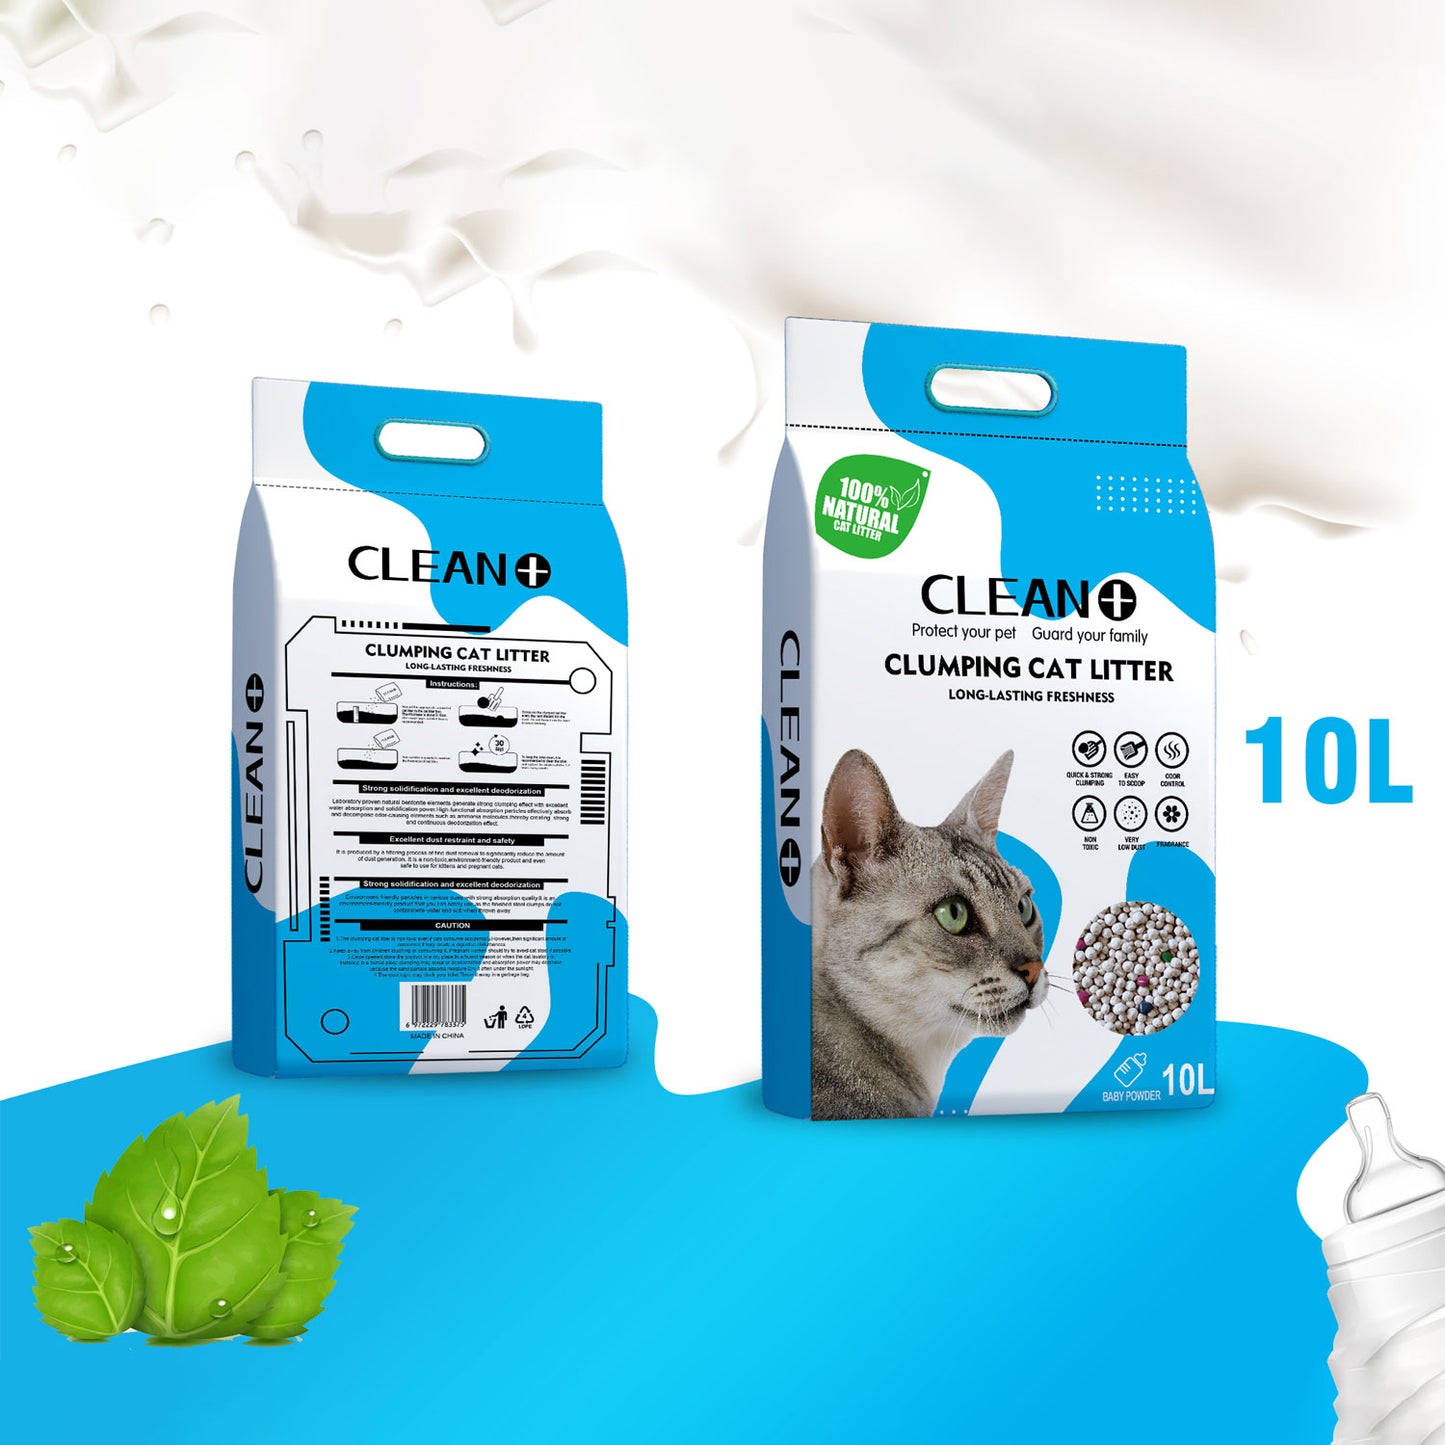 Clean + : Clumping Cat Litter : 10L : Baby Powder